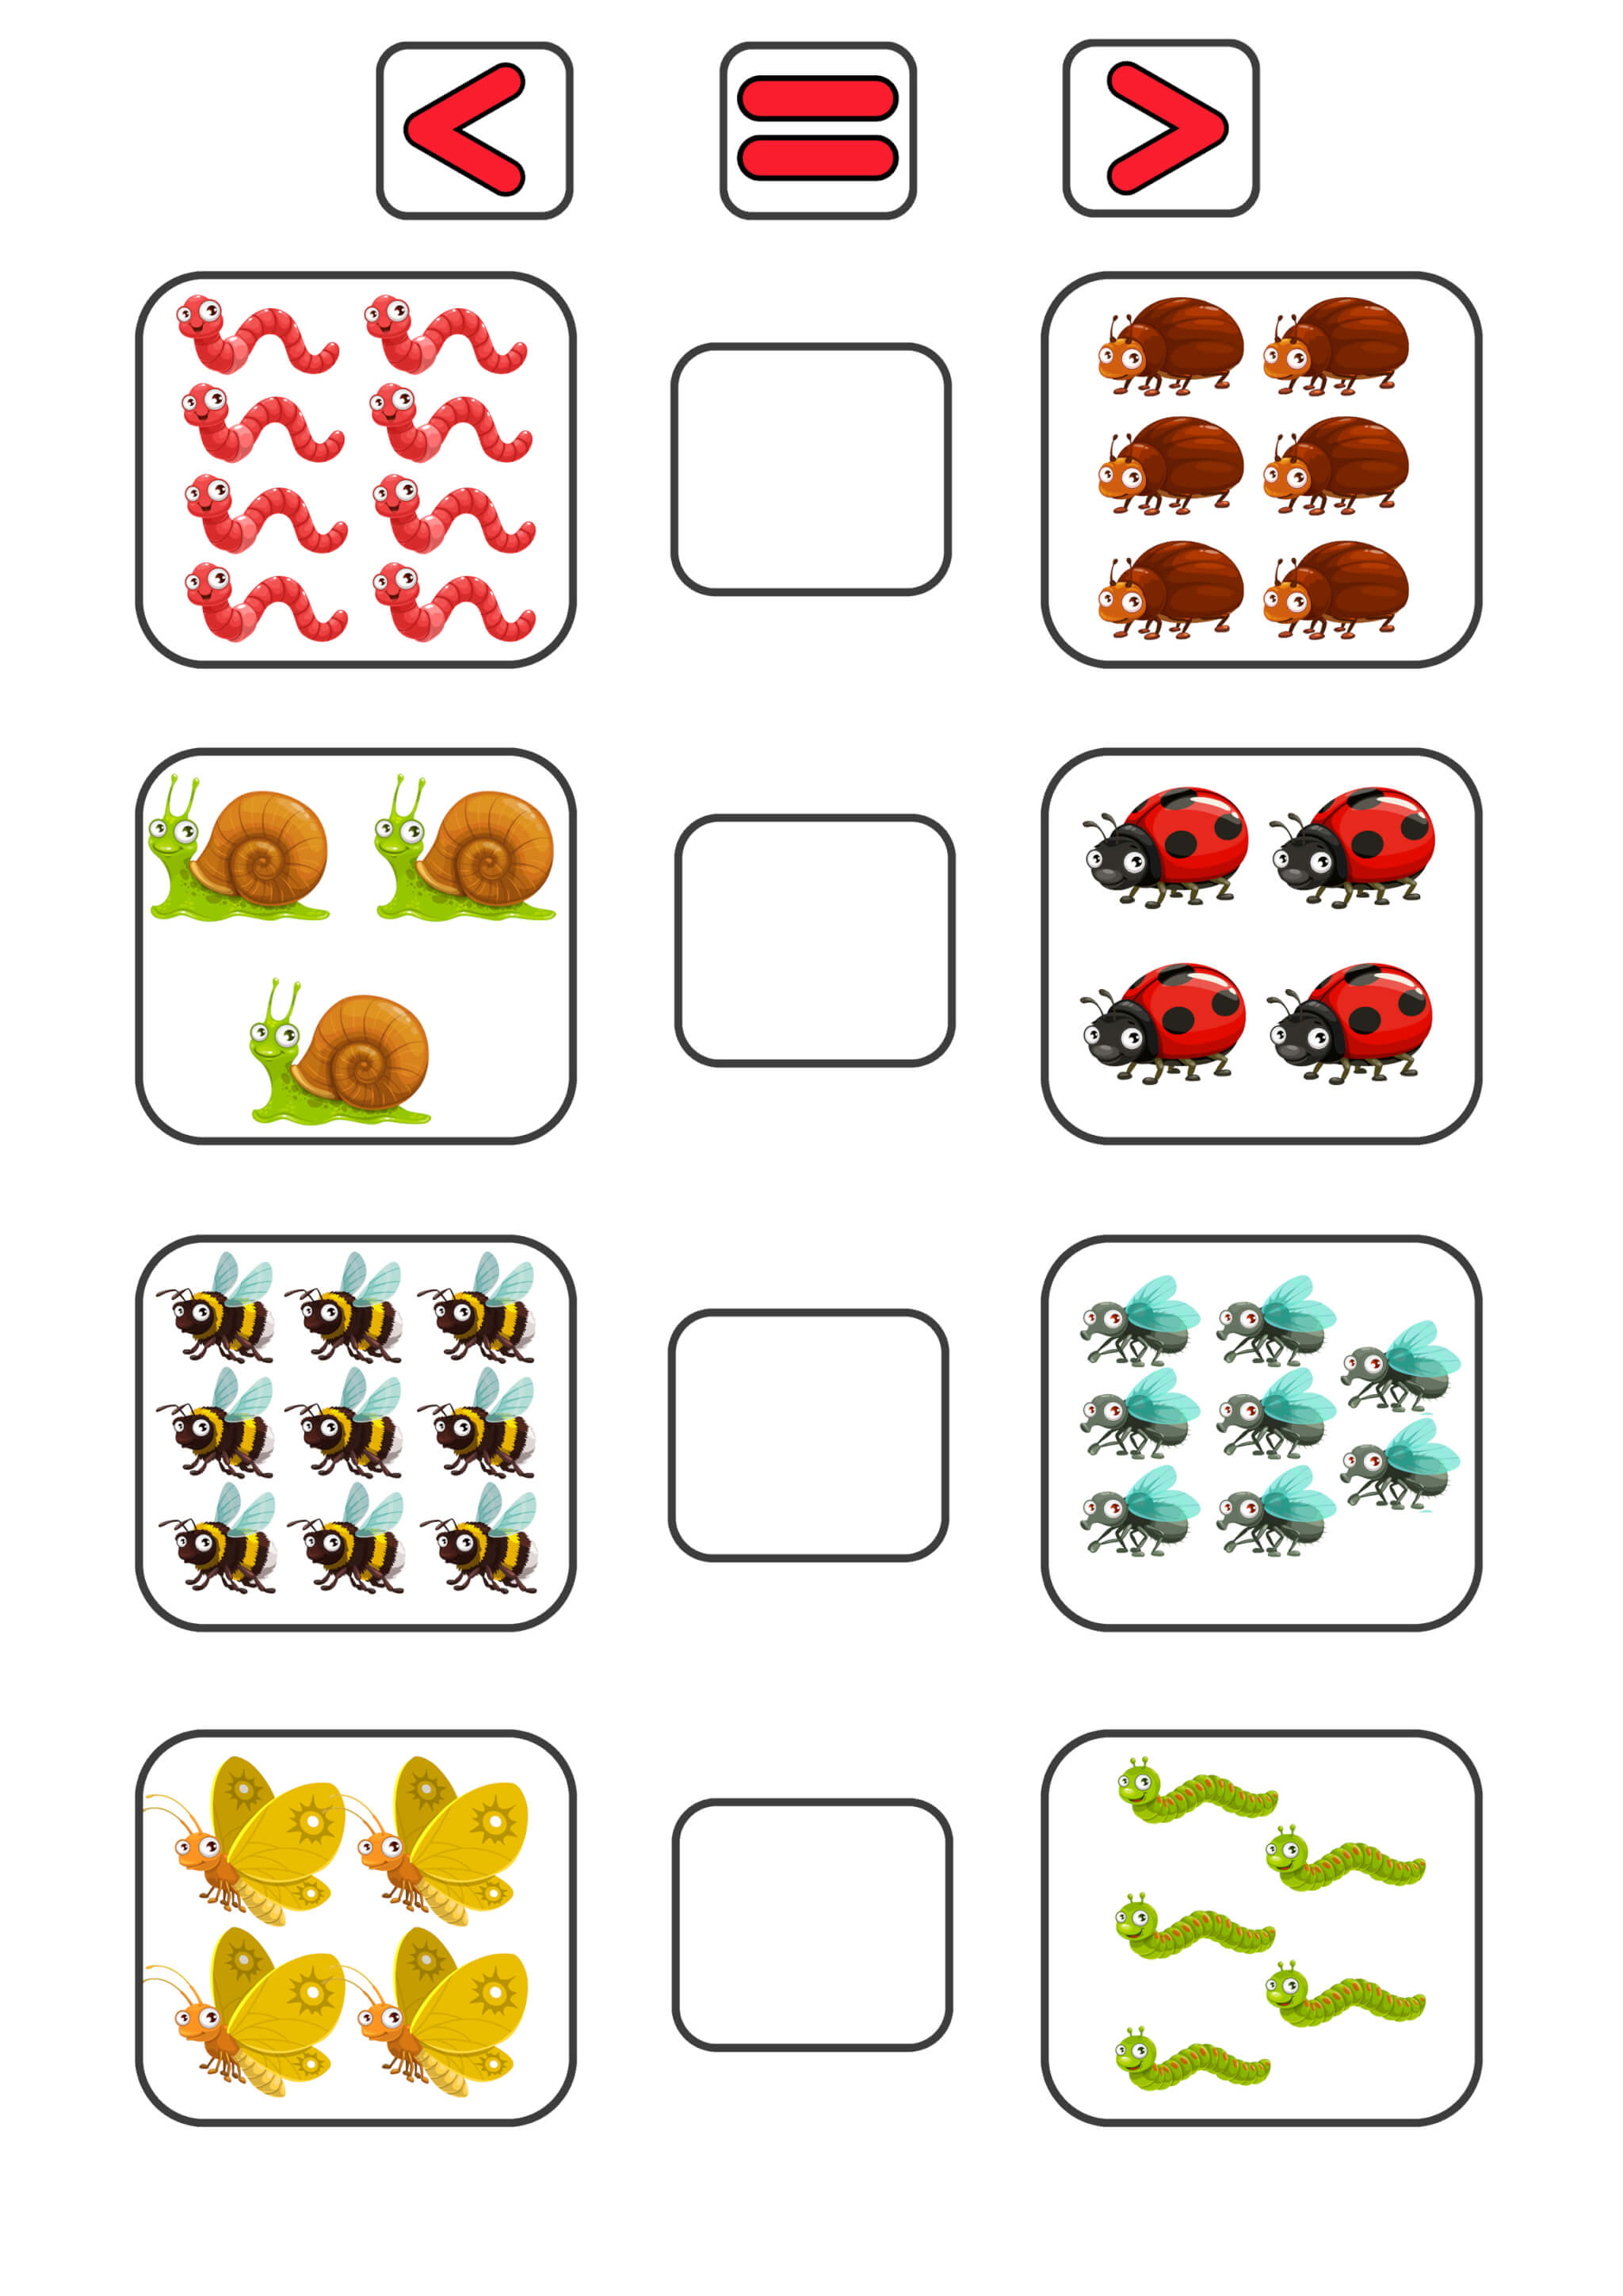 Worksheet Comparing Numbers Insects - Image 4